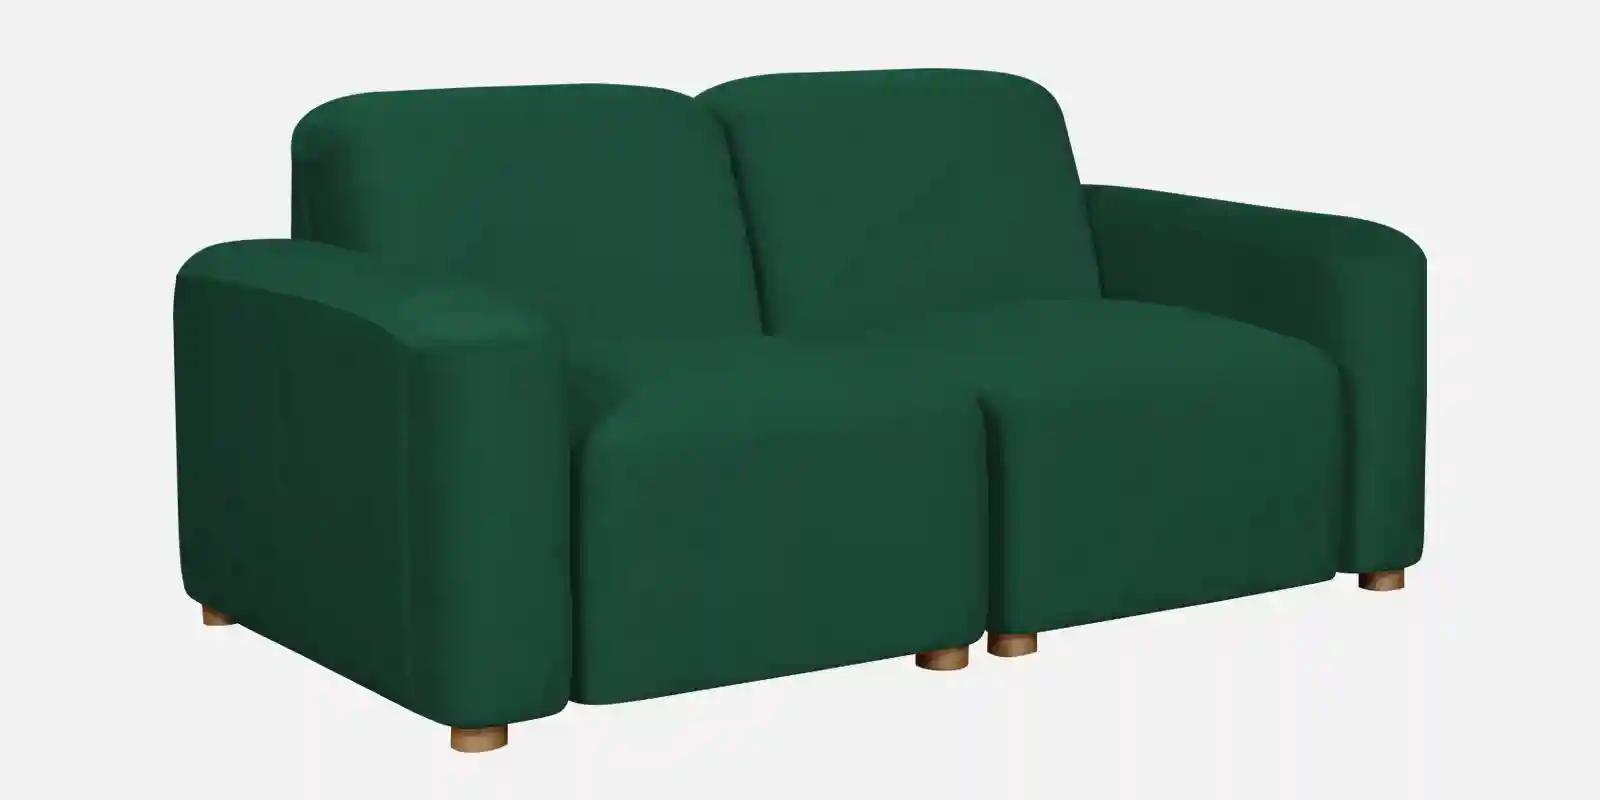 Pine Wood Polyester Fabric Teal Green -2-Seater Sofa